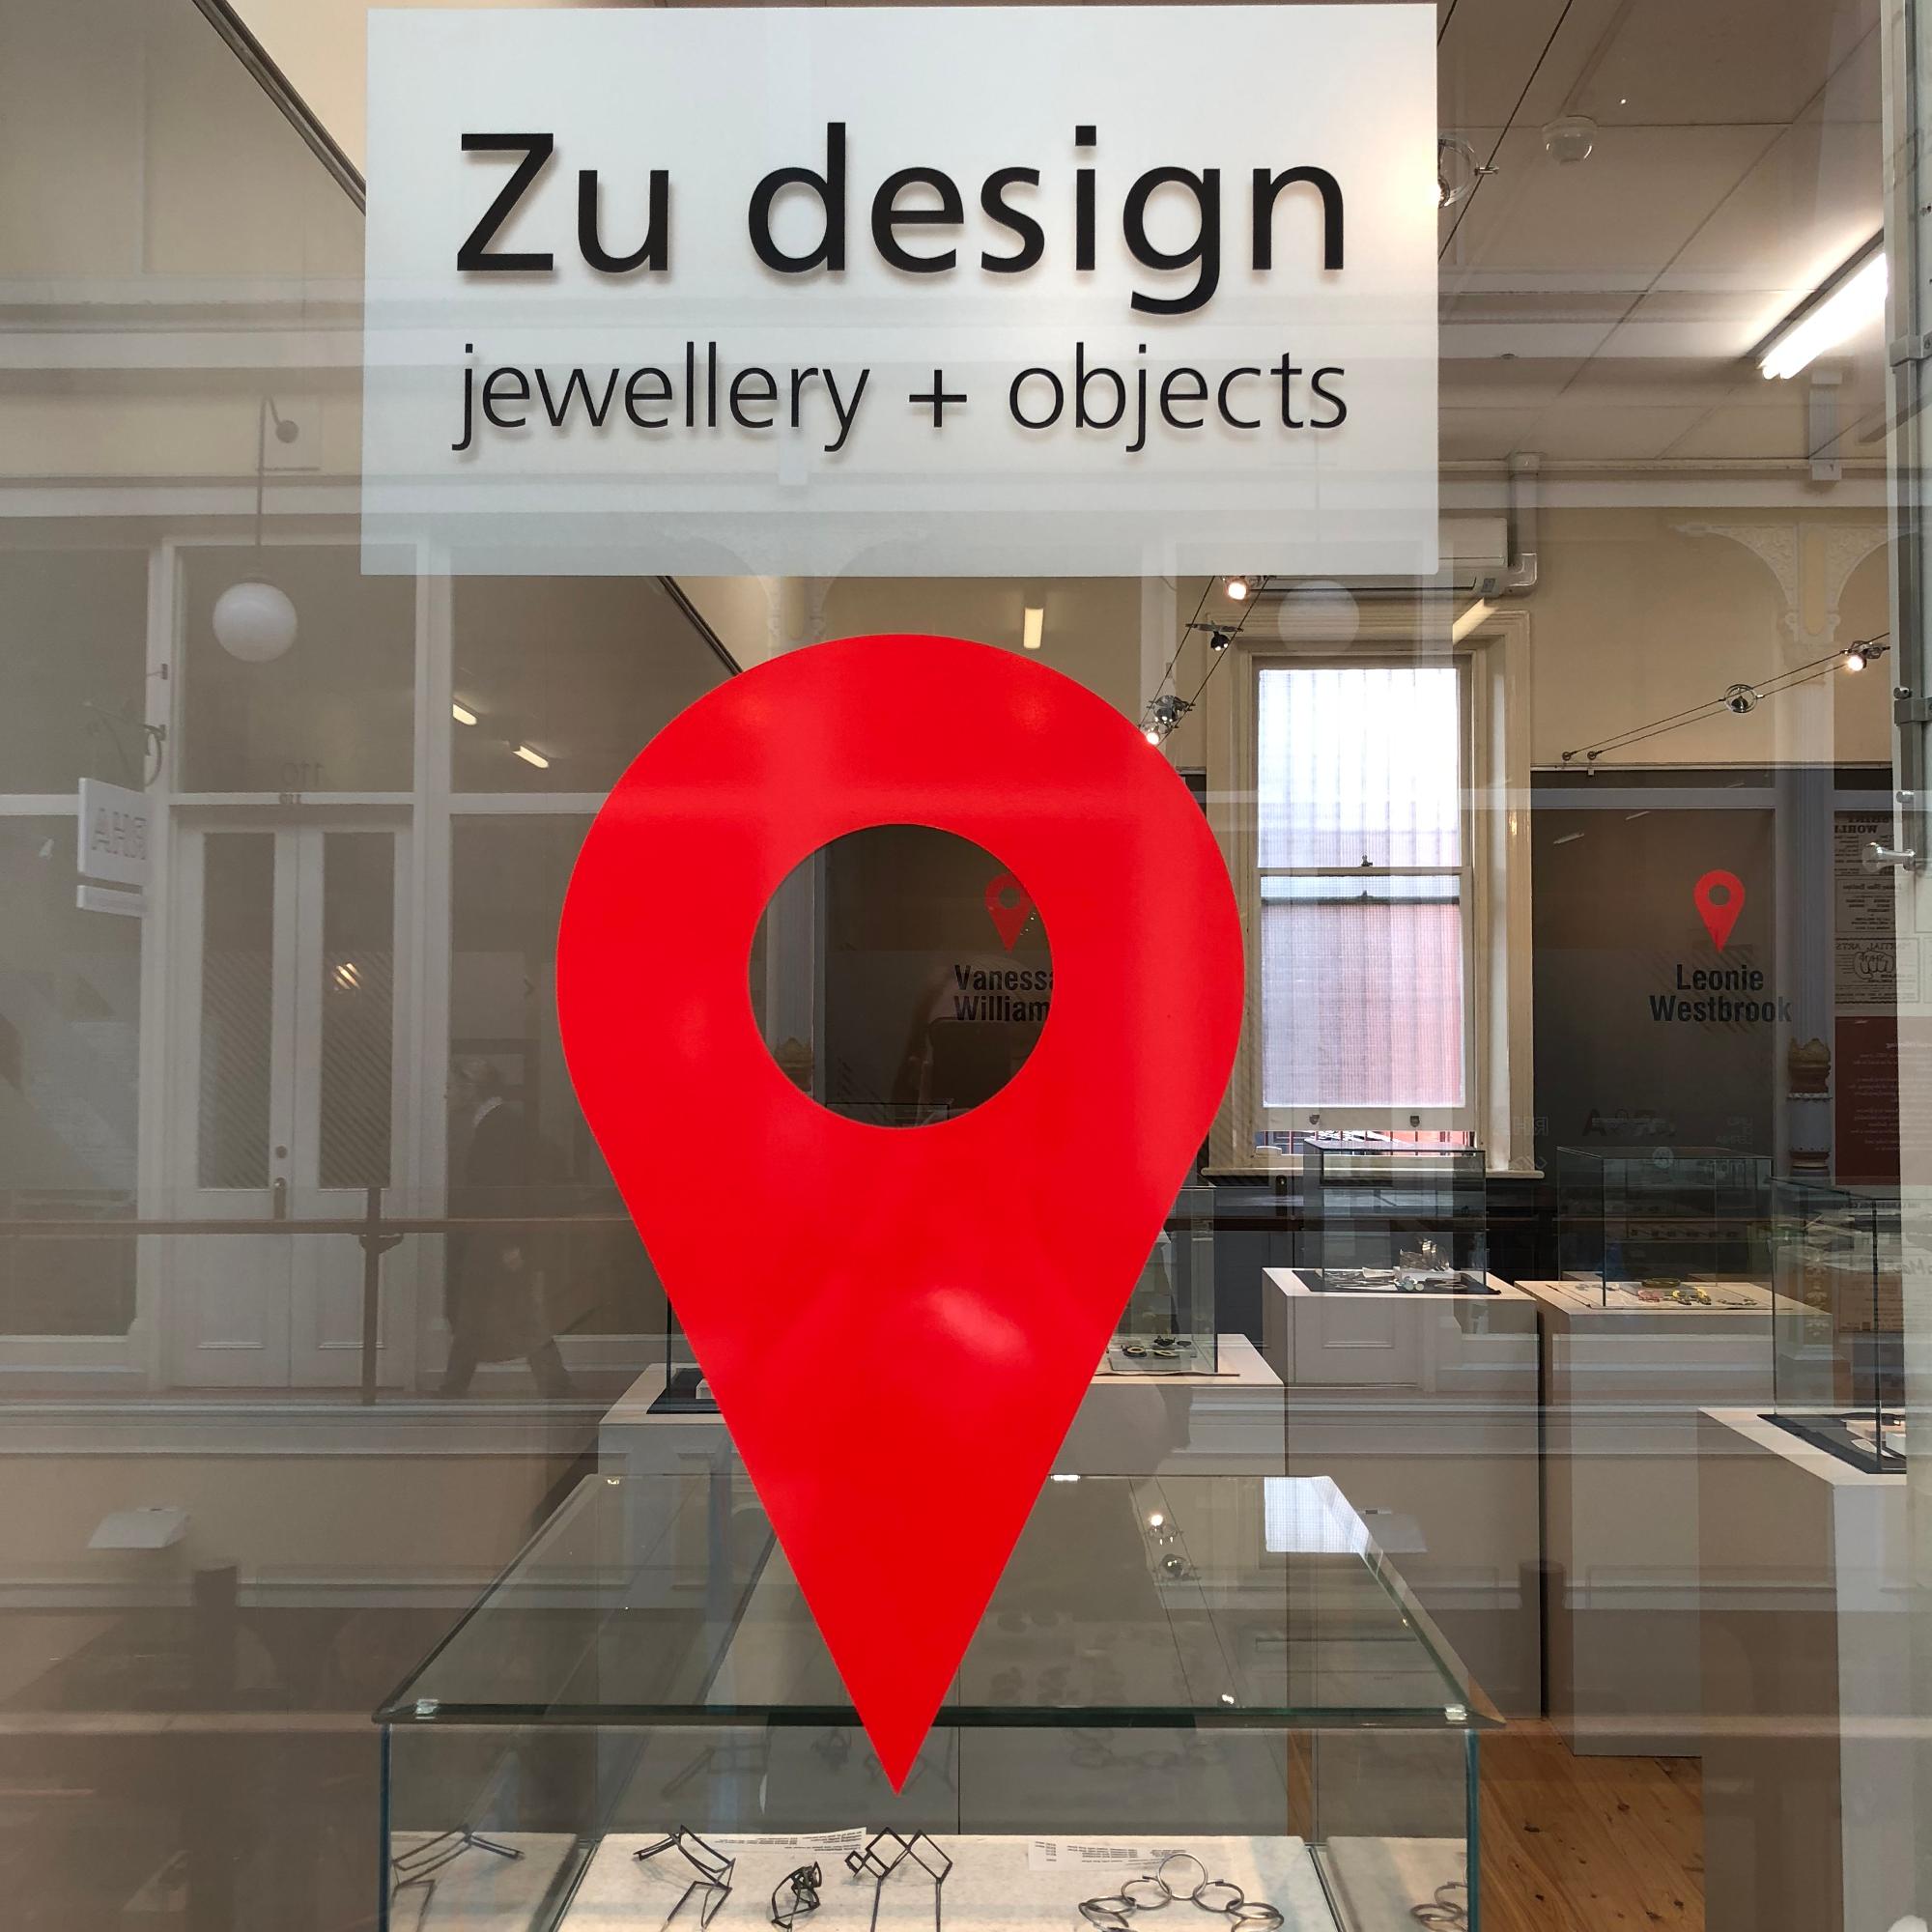 Images Zu design - jewellery + objects